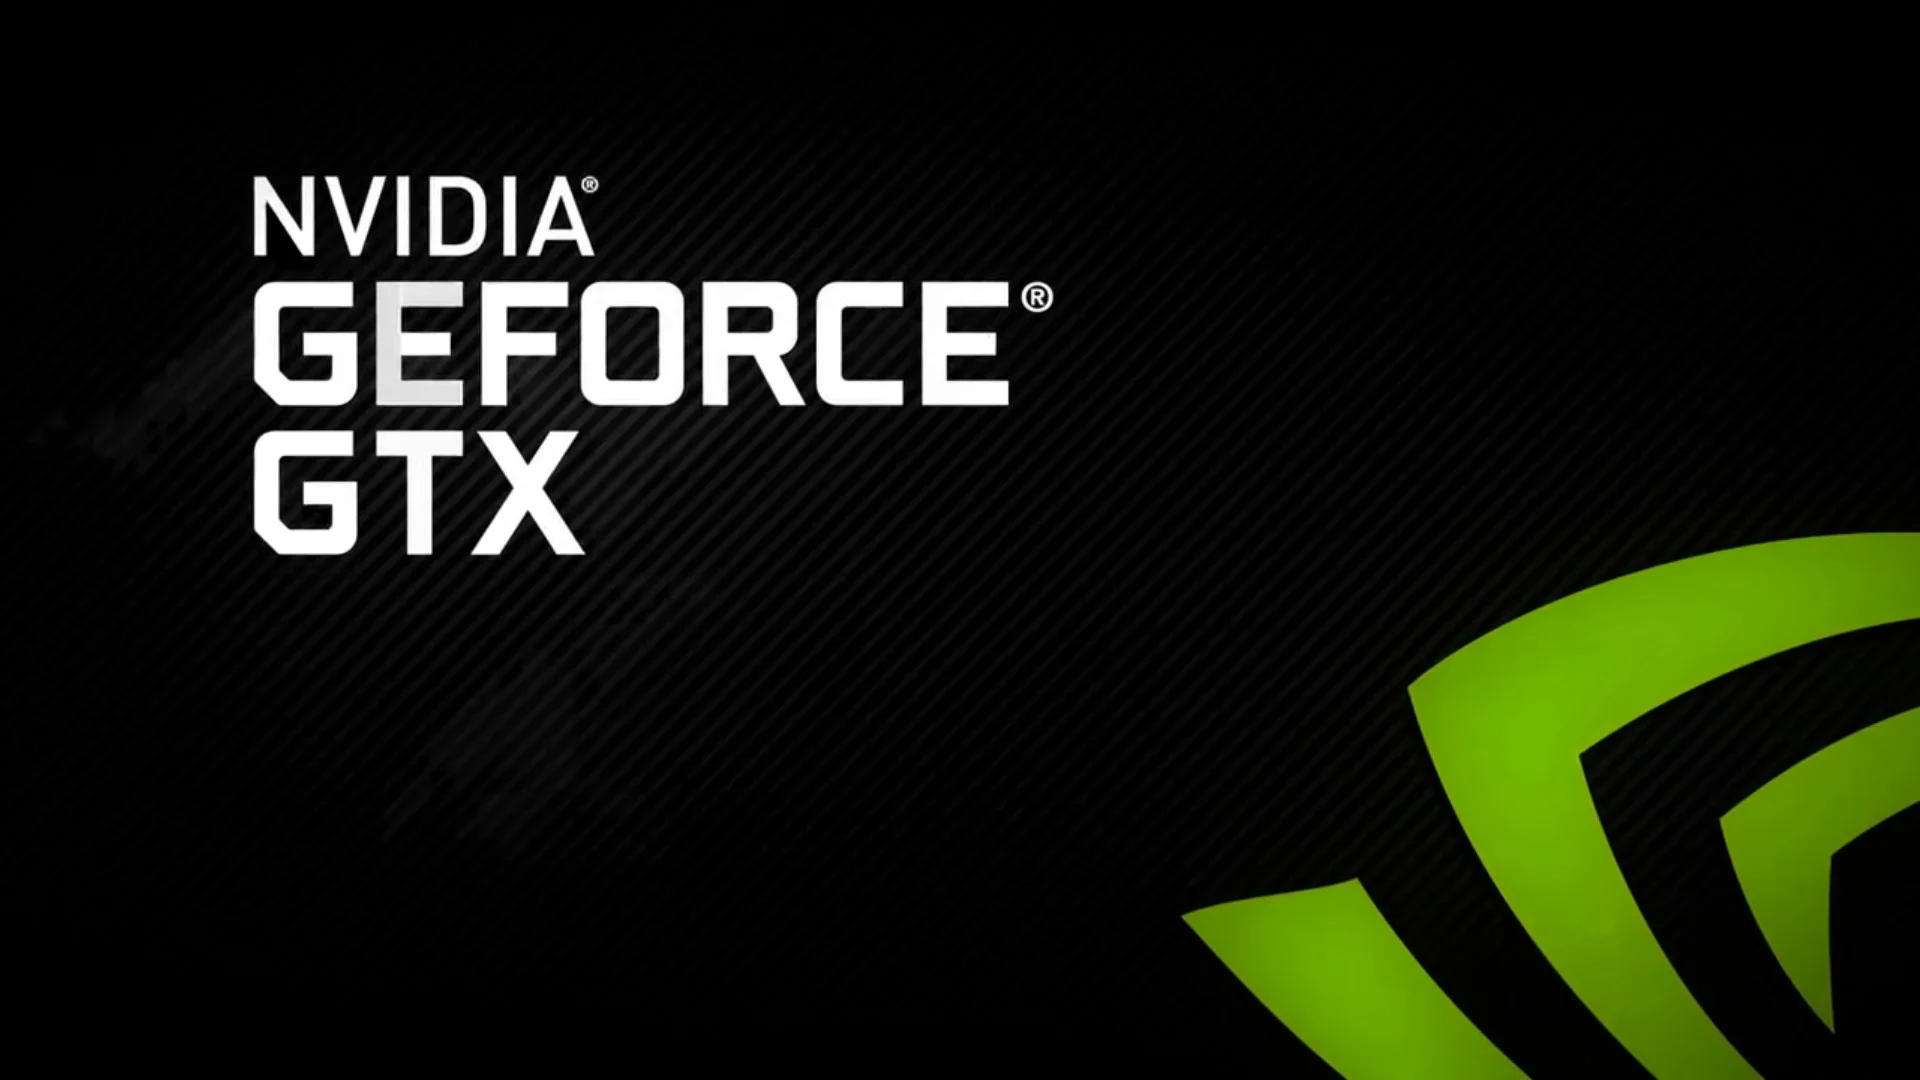 NVIDIA, today officially announces the GeForce GTX 660 and GeForce GTX